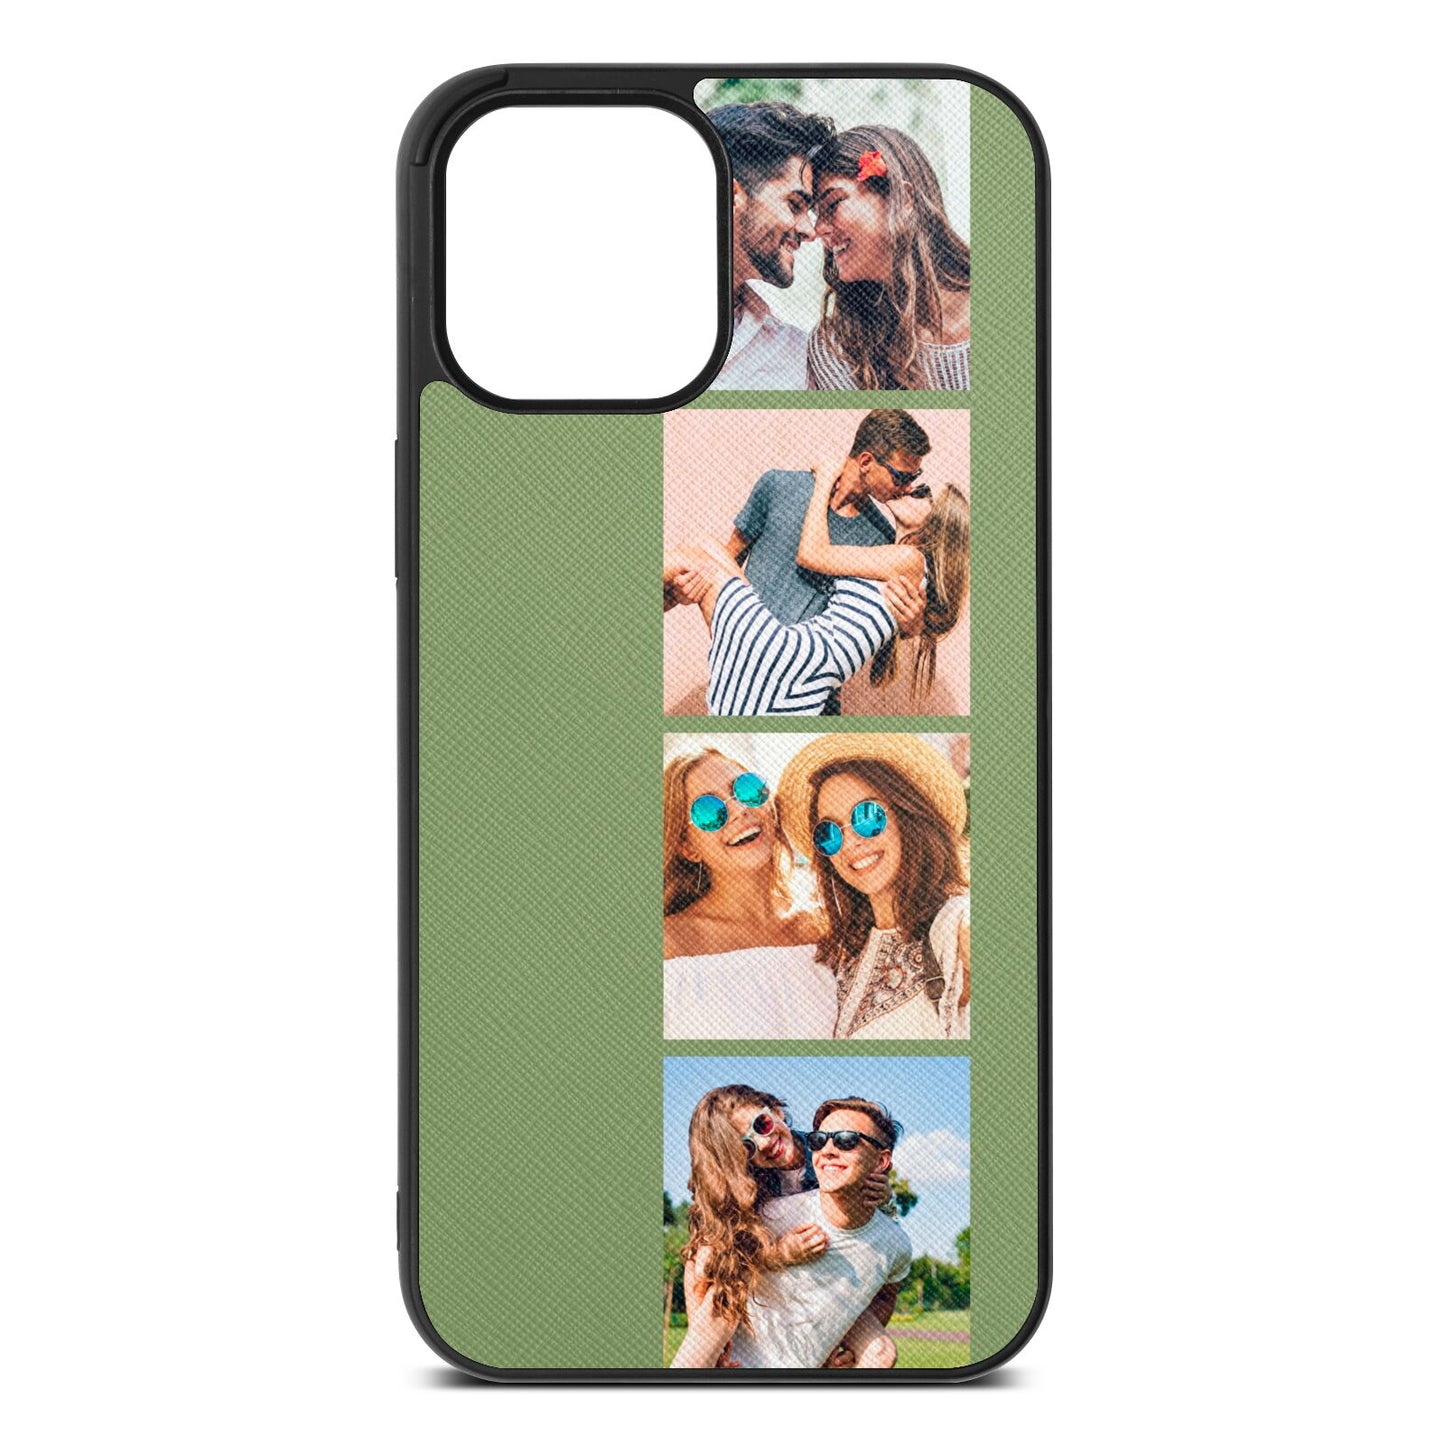 Photo Strip Montage Upload Lime Saffiano Leather iPhone 12 Pro Max Case